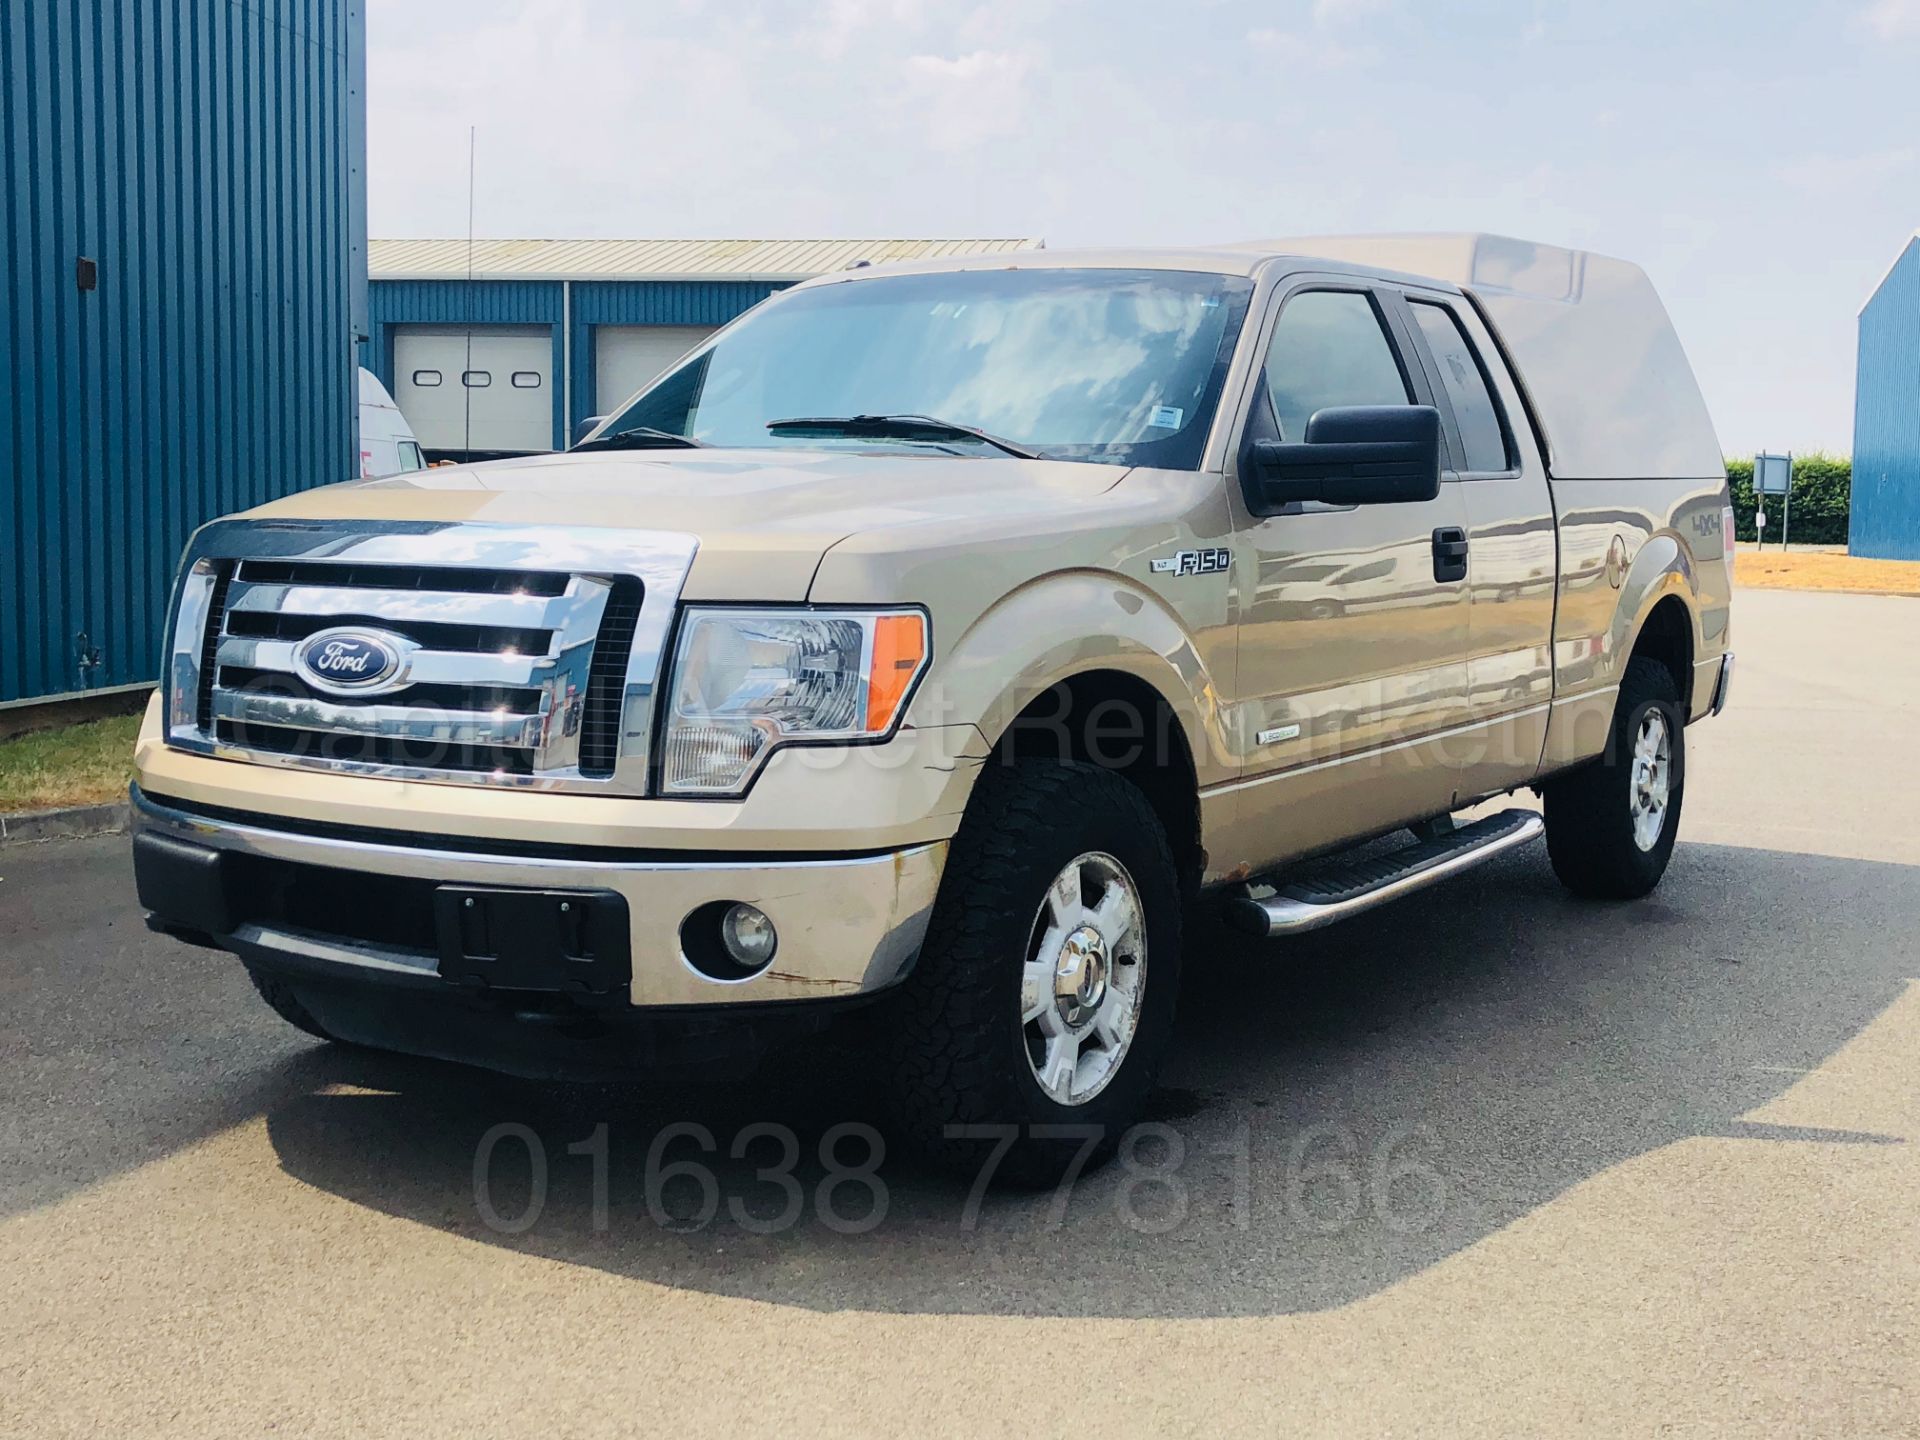 (On Sale) FORD F-150 5.4 V8 XLT EDITION KING-CAB (2012) MODEL**4X4**6 SEATER**AUTOMATIC *TOP SPEC* - Image 8 of 52